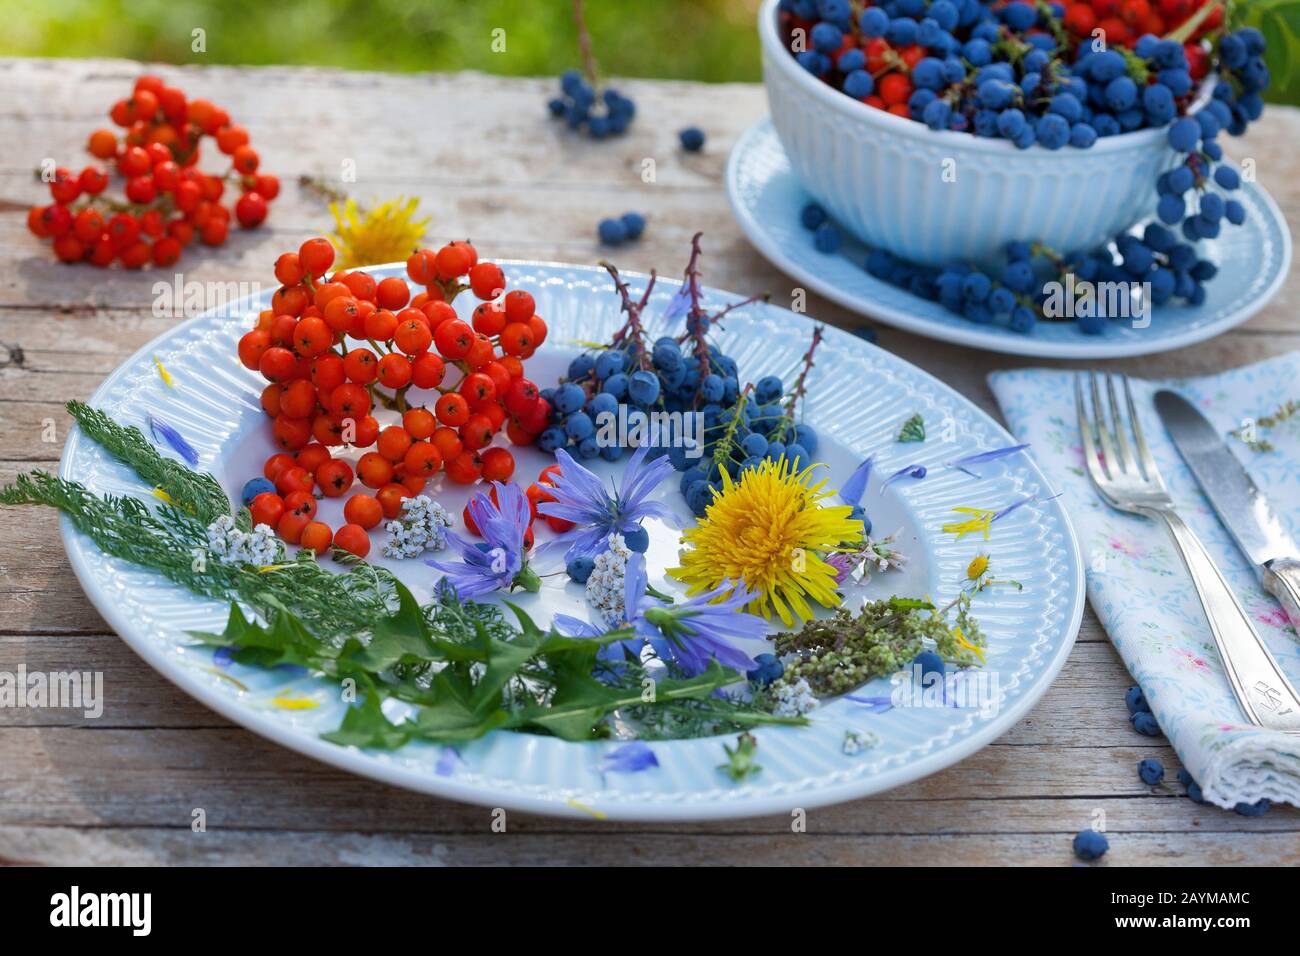 Yarrow, Common yarrow (Achillea millefolium), plate with mountain grapes and rowan tree berries, decoratet with flowers of dandelion, Yarrow and blue sailors, Germany Stock Photo